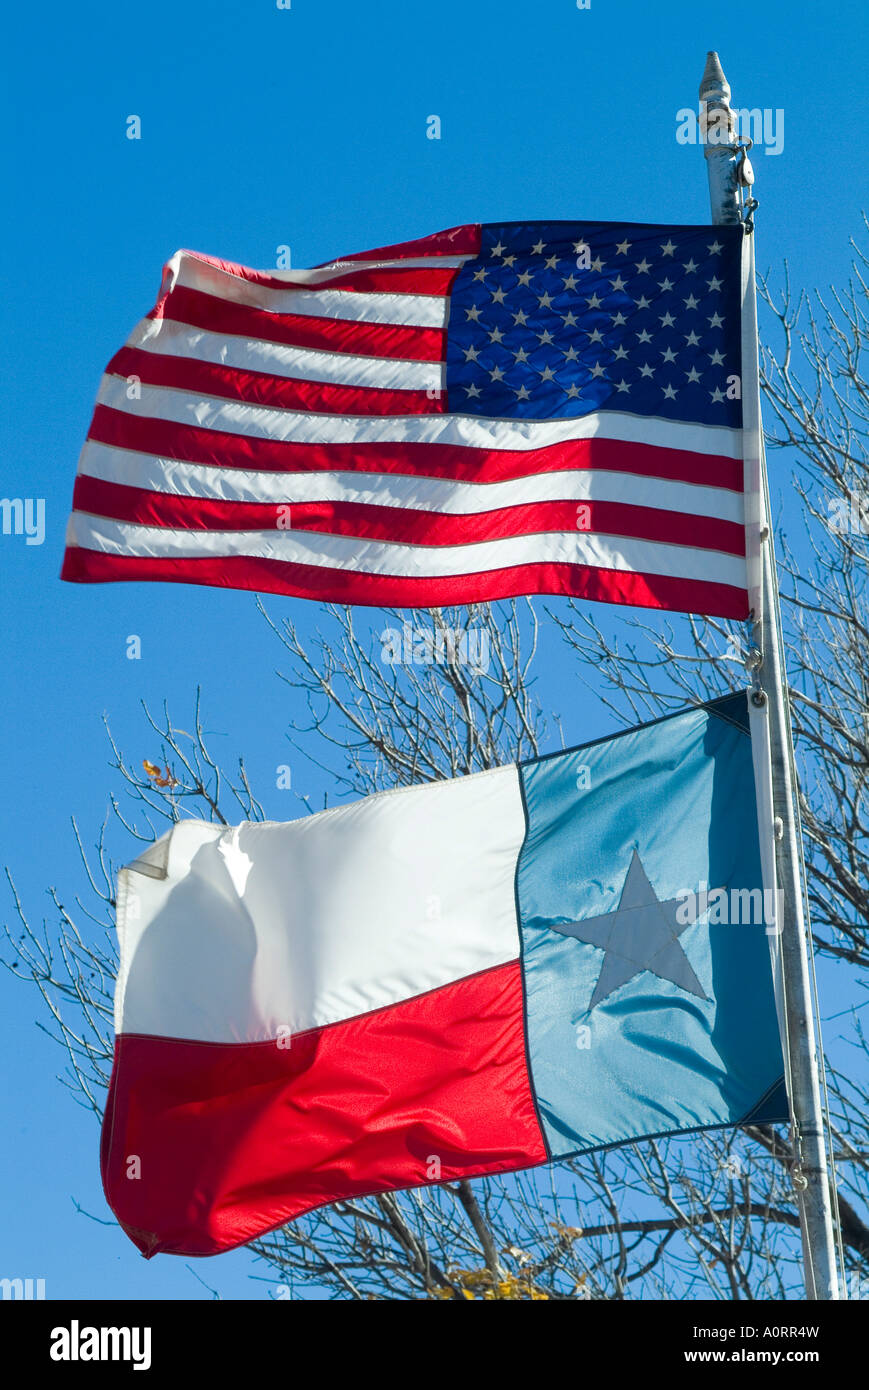 American and Texan flags Texas United States of America North America Stock Photo